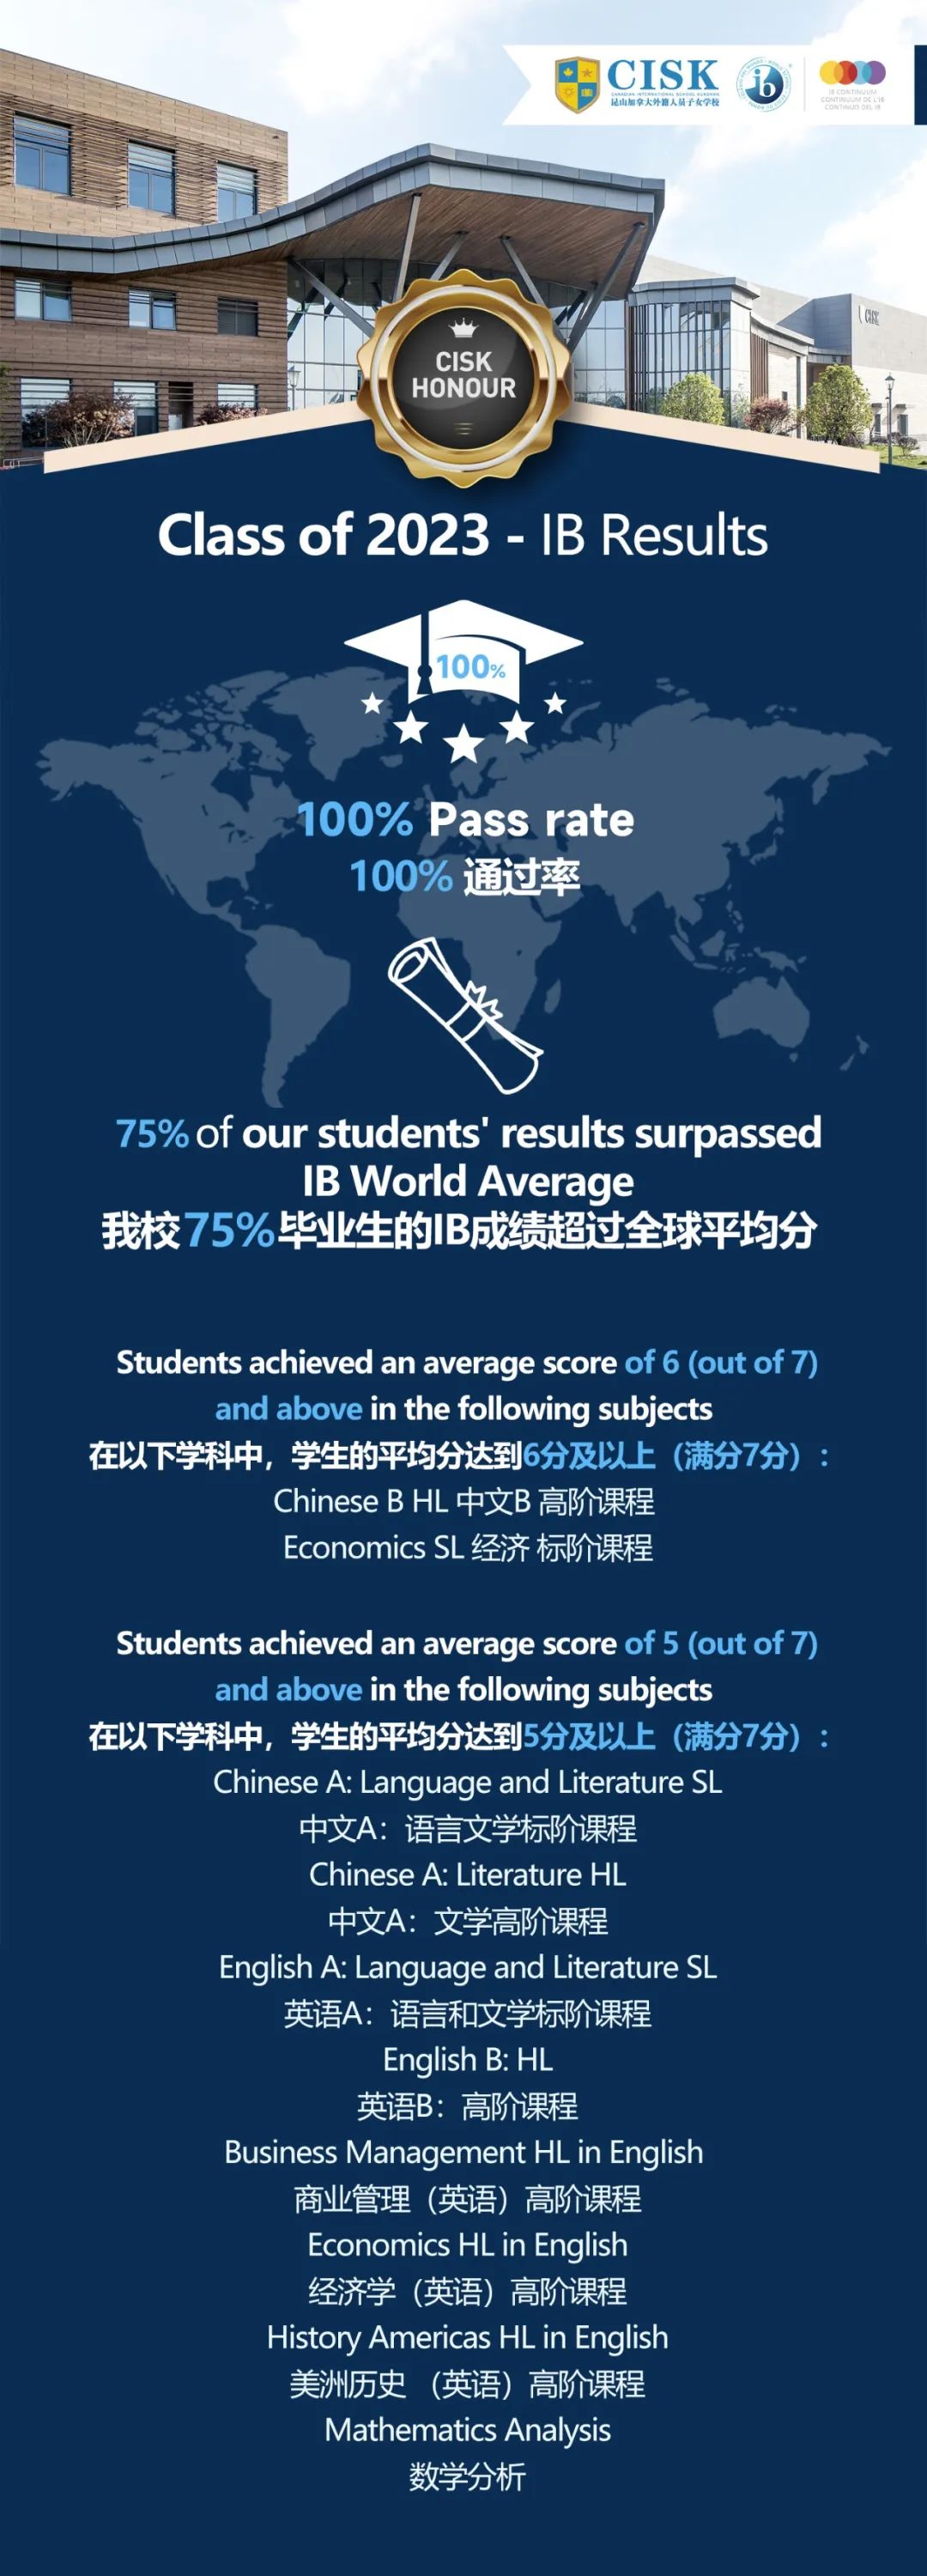 Our Outstanding IB Achievements